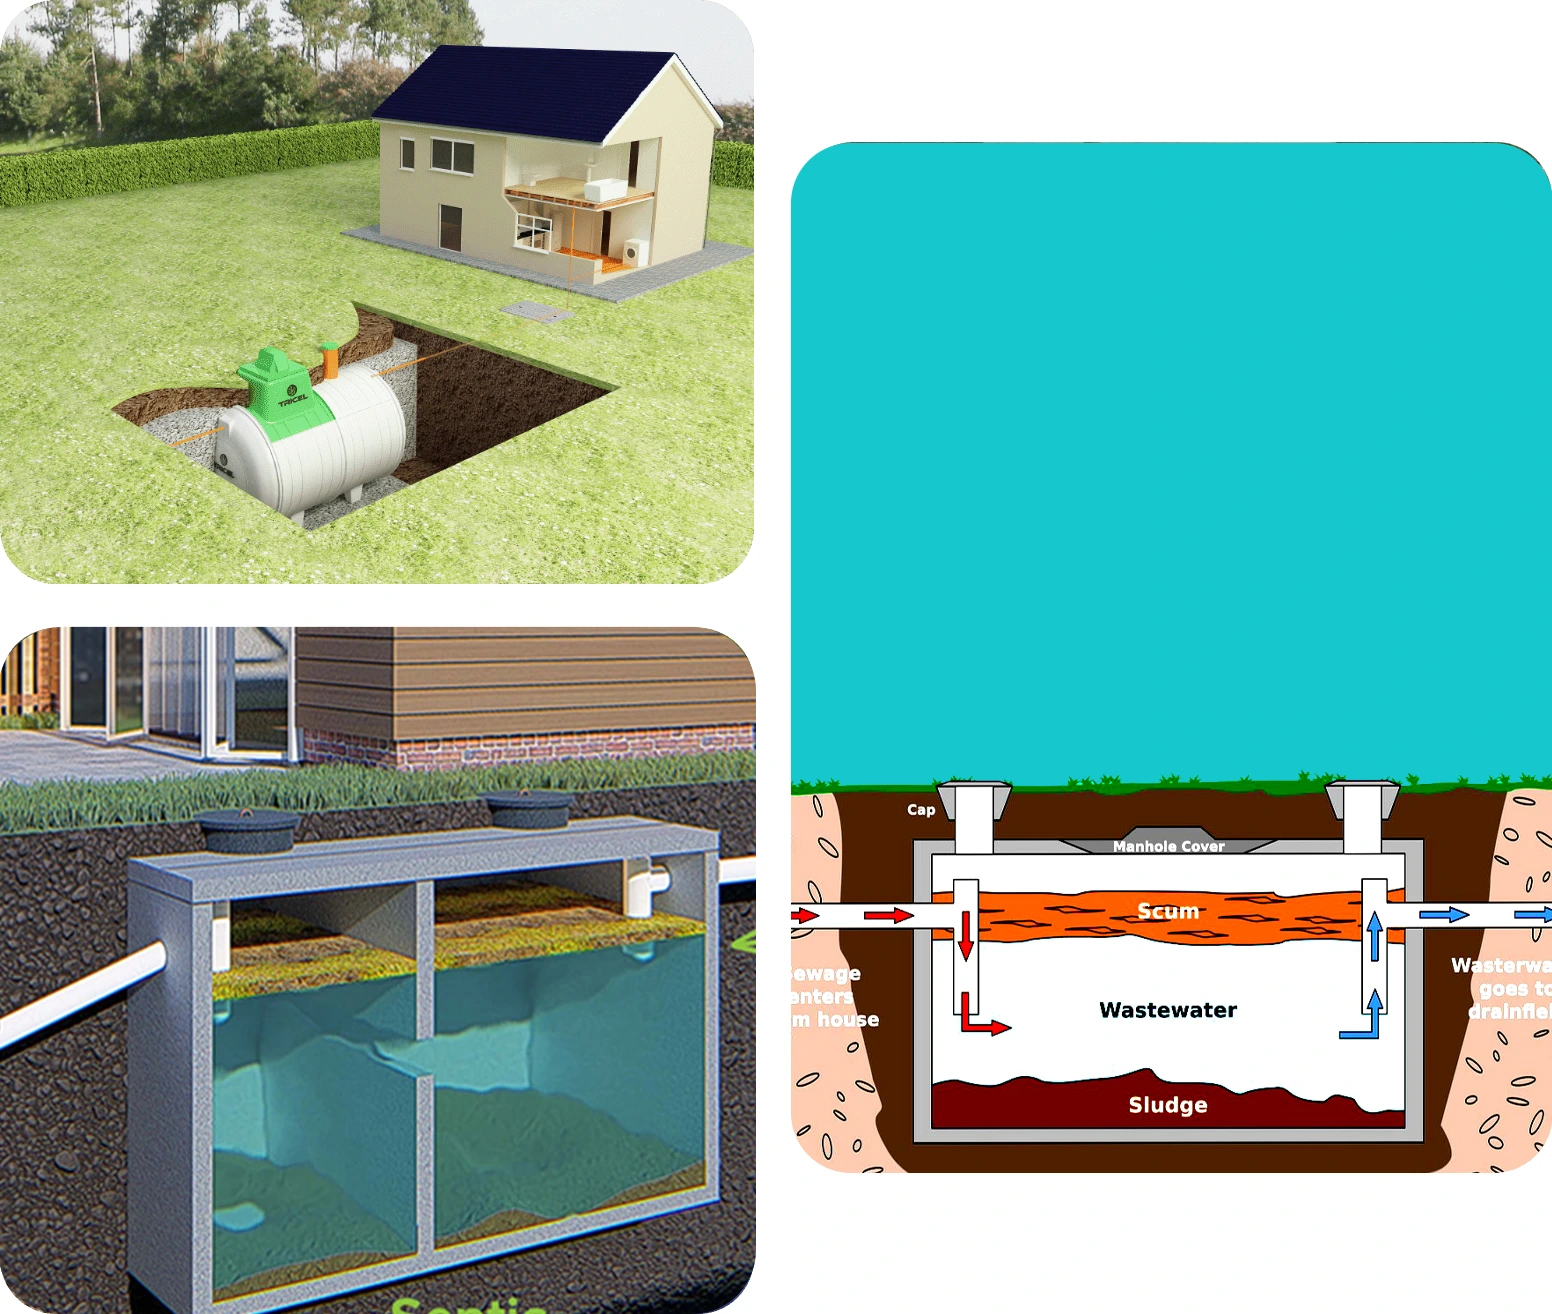 HOW DO SEPTIC TANKS FUNCTION